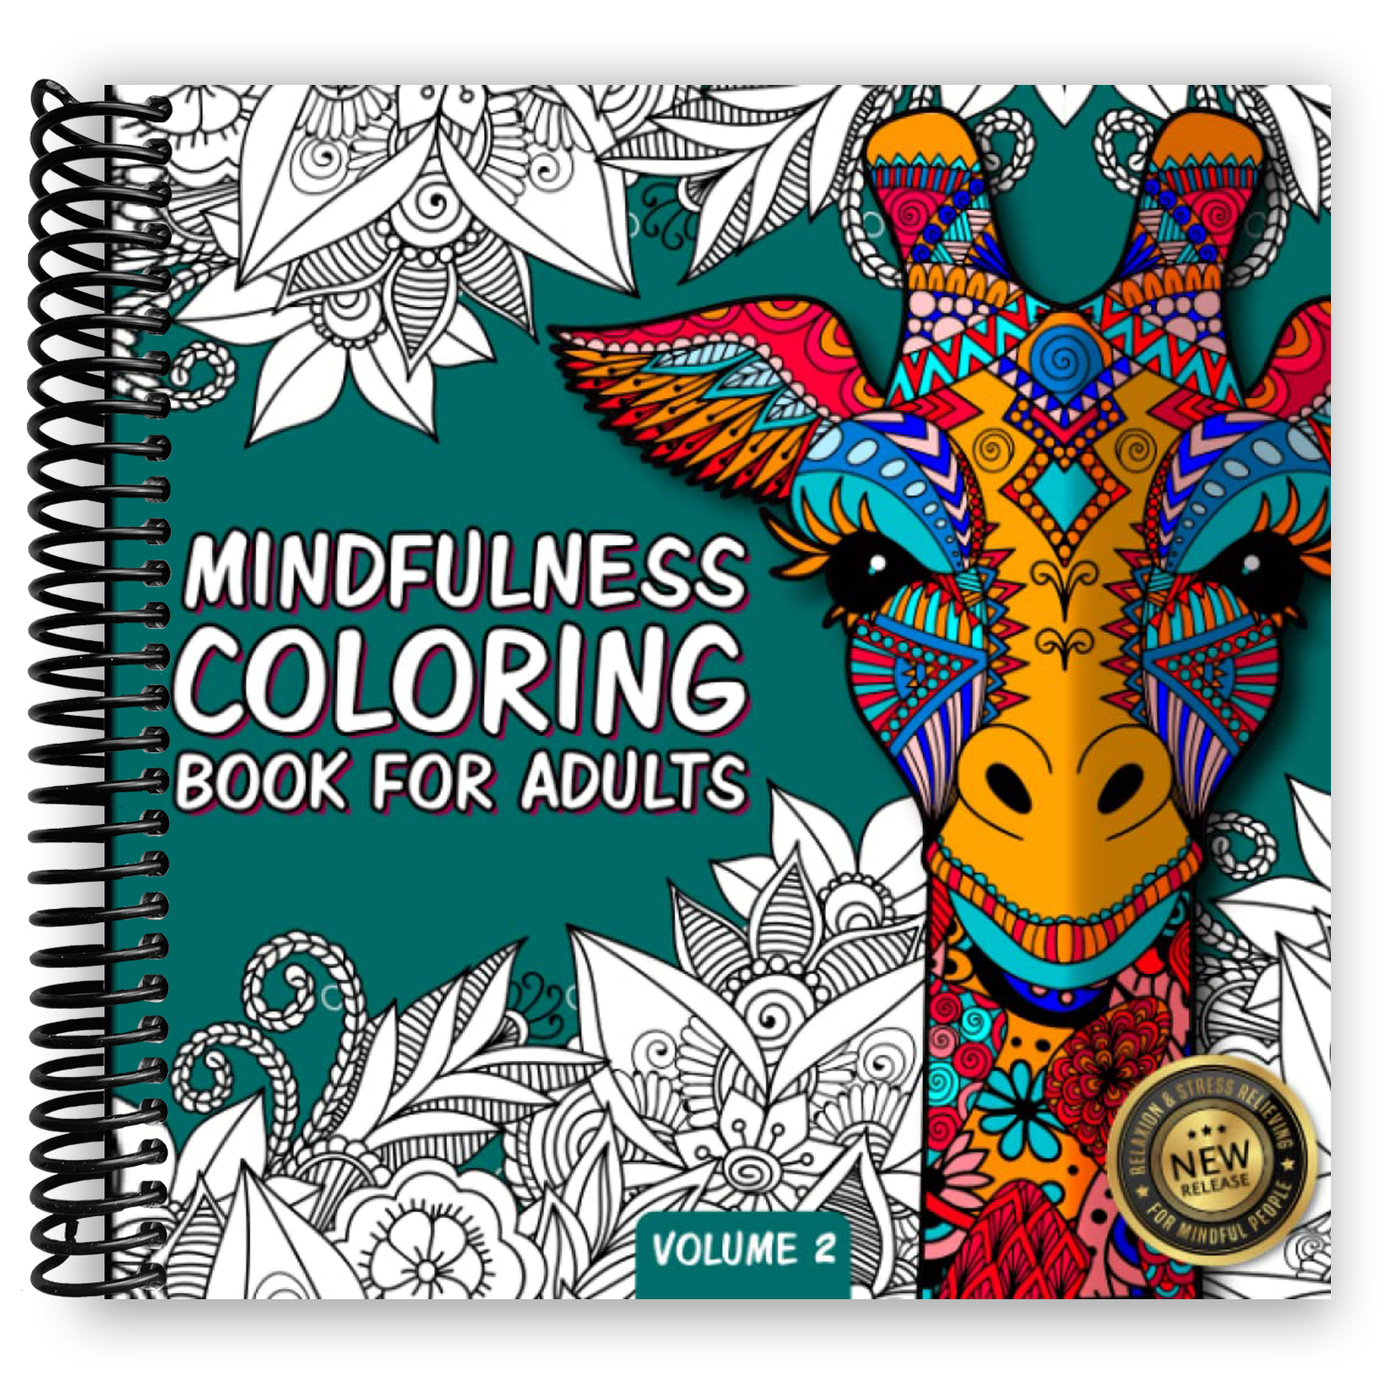 Flat Lay Female Coloring Adult Coloring Books Stress Relieving